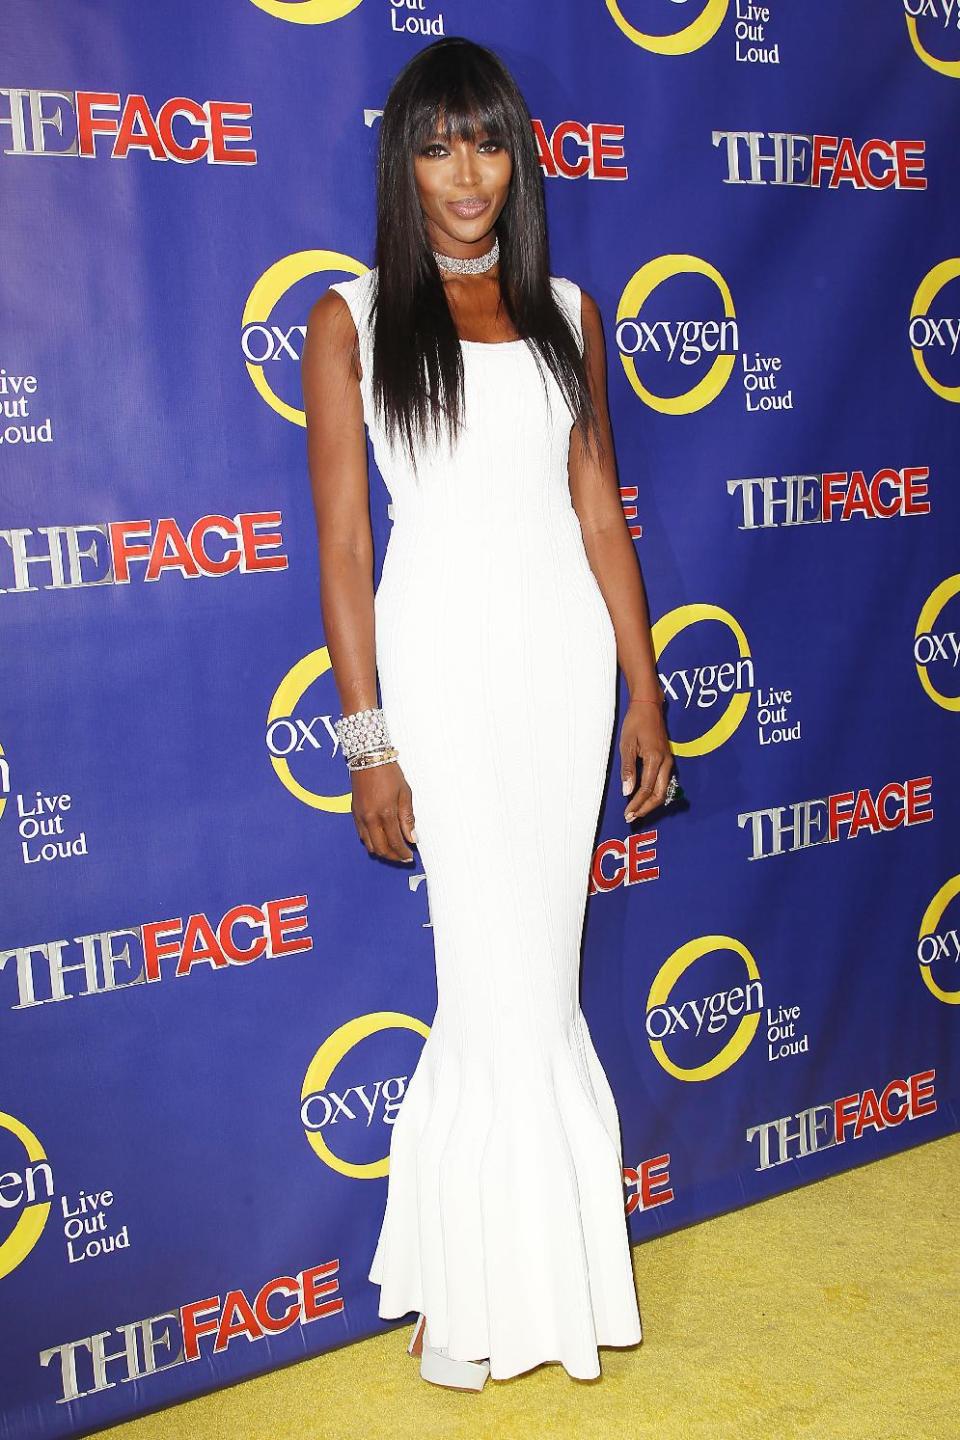 This Feb. 5, 2013 photo released by Starpix shows model Naomi Campbell at the premiere of the Oxygen network series, "The Face," in New York. Campbell, along with models Coco Rocha and Karolina Kurkova, are coaches to aspiring models in a competition to find the next face of beauty retailer ULTA Beauty. The show, hosted by fashion photographer Nigel Barker, premieres on Feb. 12 at 9 p.m. EST on Oxygen. (AP Photo/Starpix, Kristina Bumphrey)